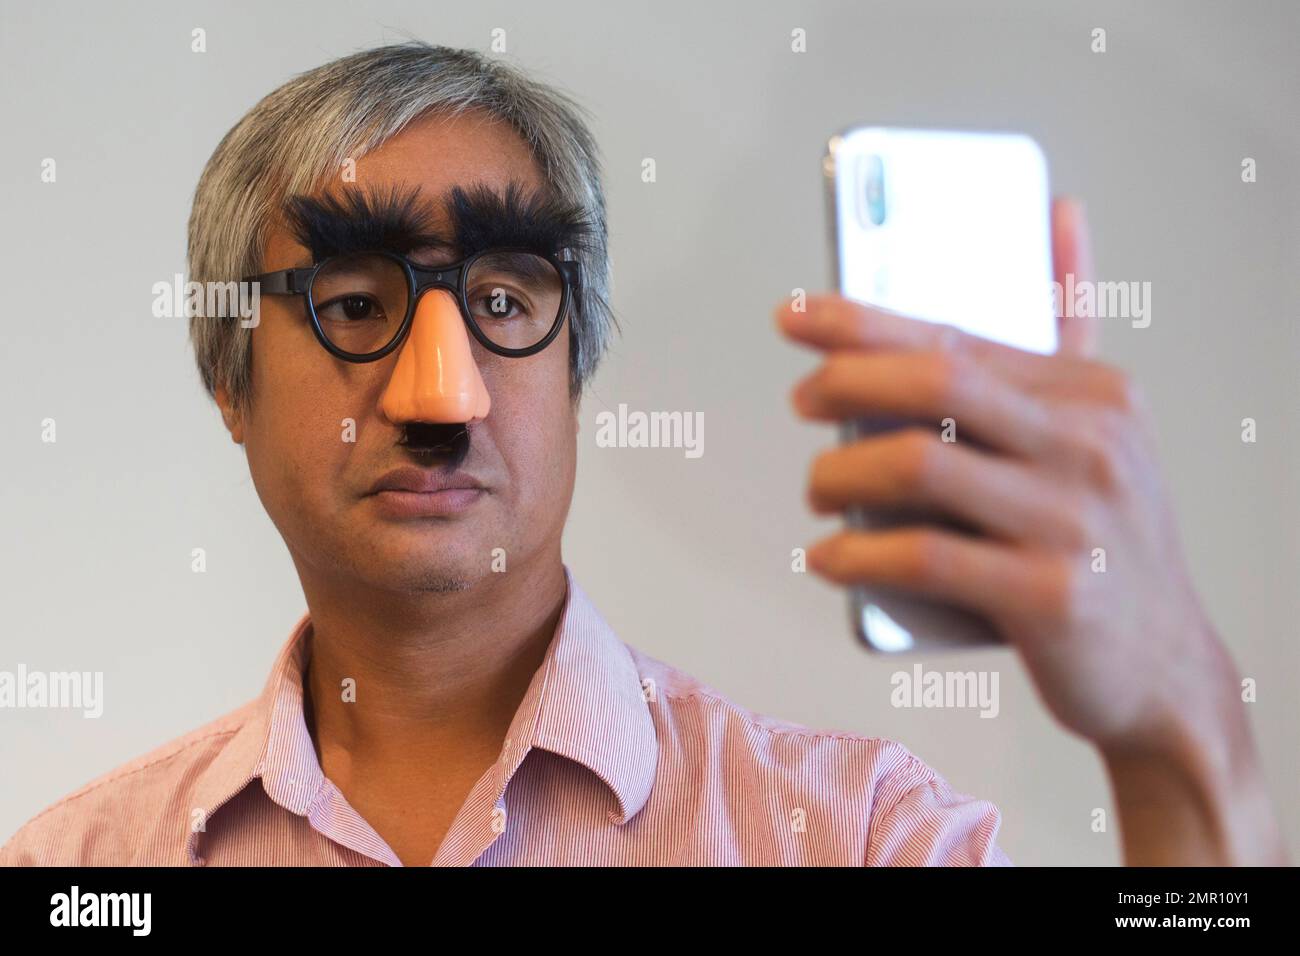 https://c8.alamy.com/comp/2MR10Y1/in-this-monday-oct-30-2017-photo-associated-press-reporter-anick-jesdanun-demonstrates-face-id-apples-name-for-its-facial-recognition-technology-on-an-iphone-x-in-new-york-if-youre-wearing-glasses-the-iphone-can-still-recognize-you-using-other-parts-of-your-face-within-reason-the-iphone-did-not-recognize-jesdanun-with-this-costume-on-ap-photomark-lennihan-2MR10Y1.jpg